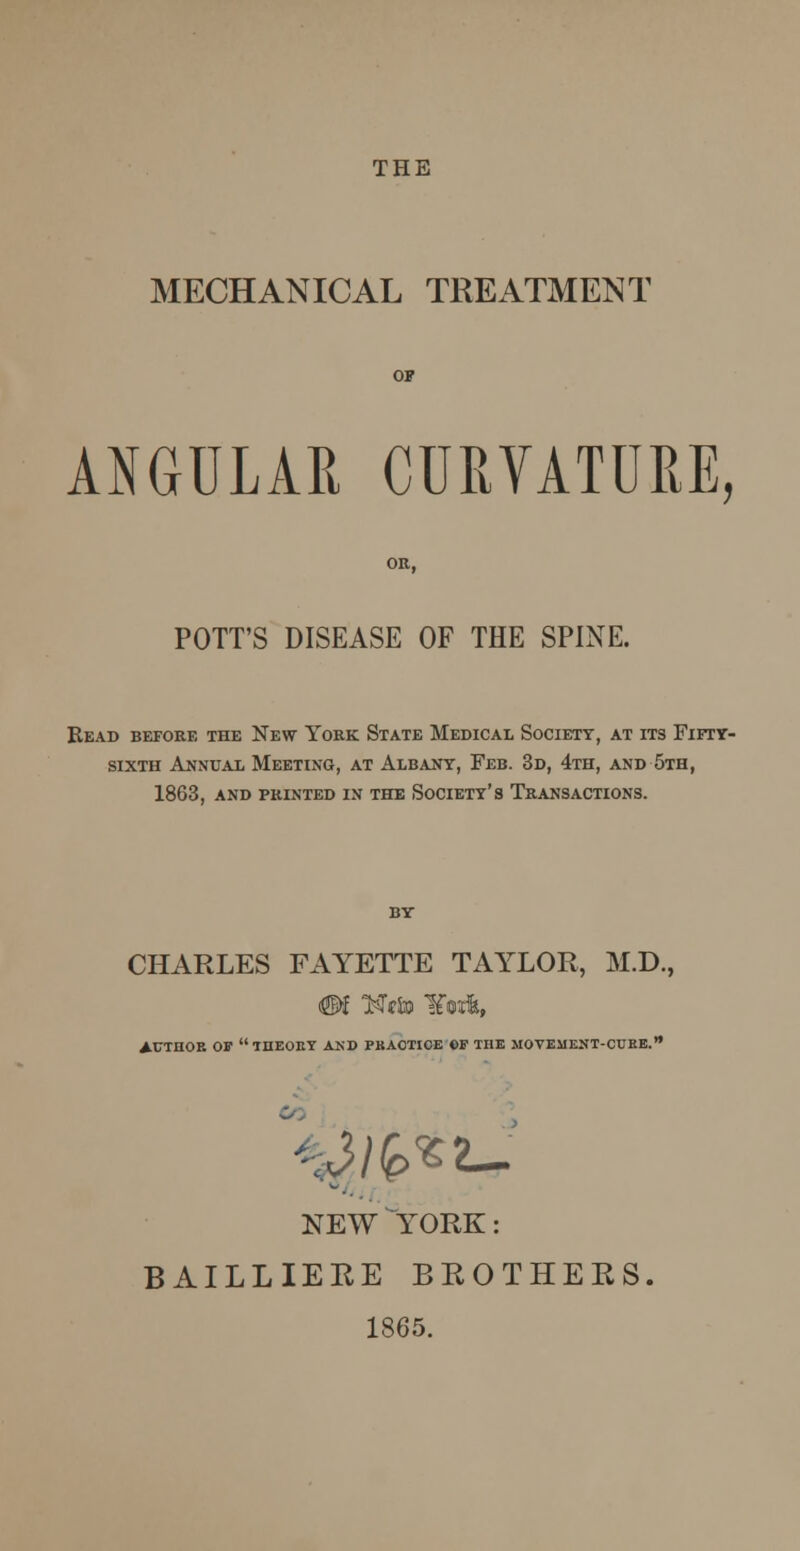 THE MECHANICAL TREATMENT ANGULAR CURVATURE, POTT'S DISEASE OF THE SPINE. Bead before the New York State Medical Society, at its Fifty- sixth Annual Meeting, at Albany, Feb. 3d, 4th, and 5th, 1863, and printed in the society's transactions. CHARLES FAYETTE TAYLOR, M.D., AUTHOR OIP THEORY AND PRACTICE CF THE MOVEMENT-CURE. --Jib**- NEW YORK: BAILLIERE BROTHERS. 1865.